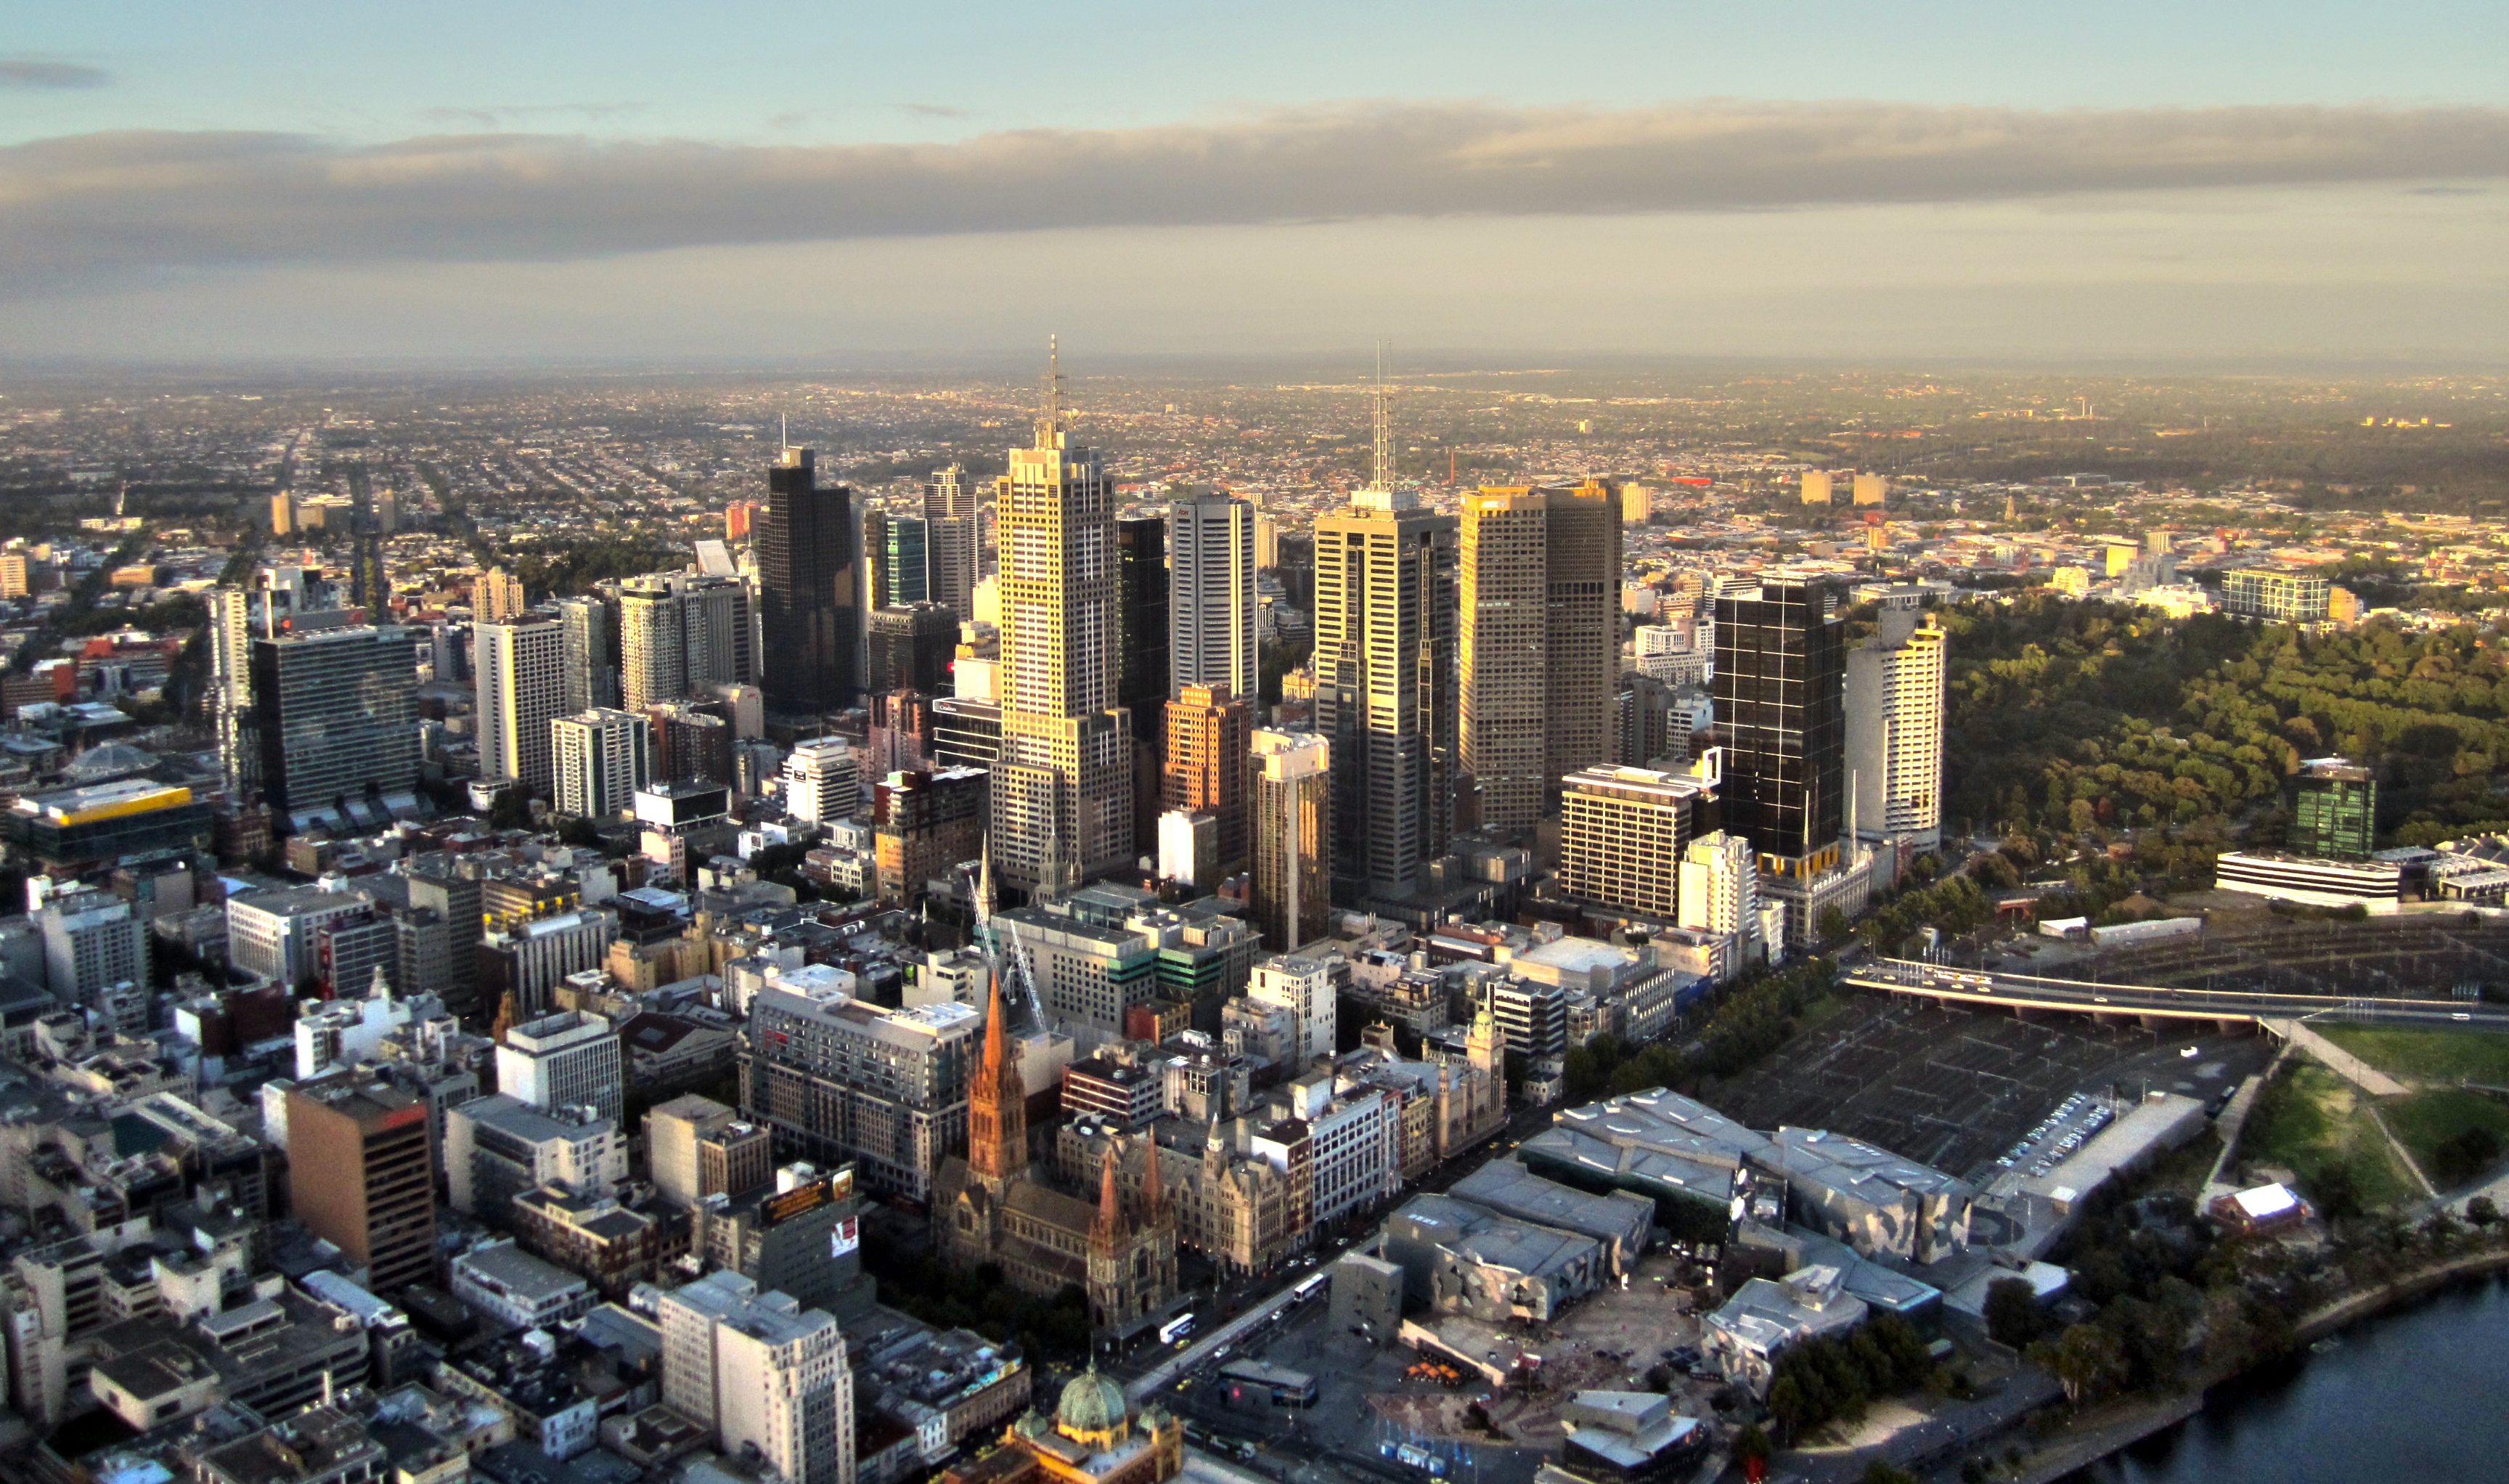 Melbourne is on track to be Australia's largest city as early as 2030